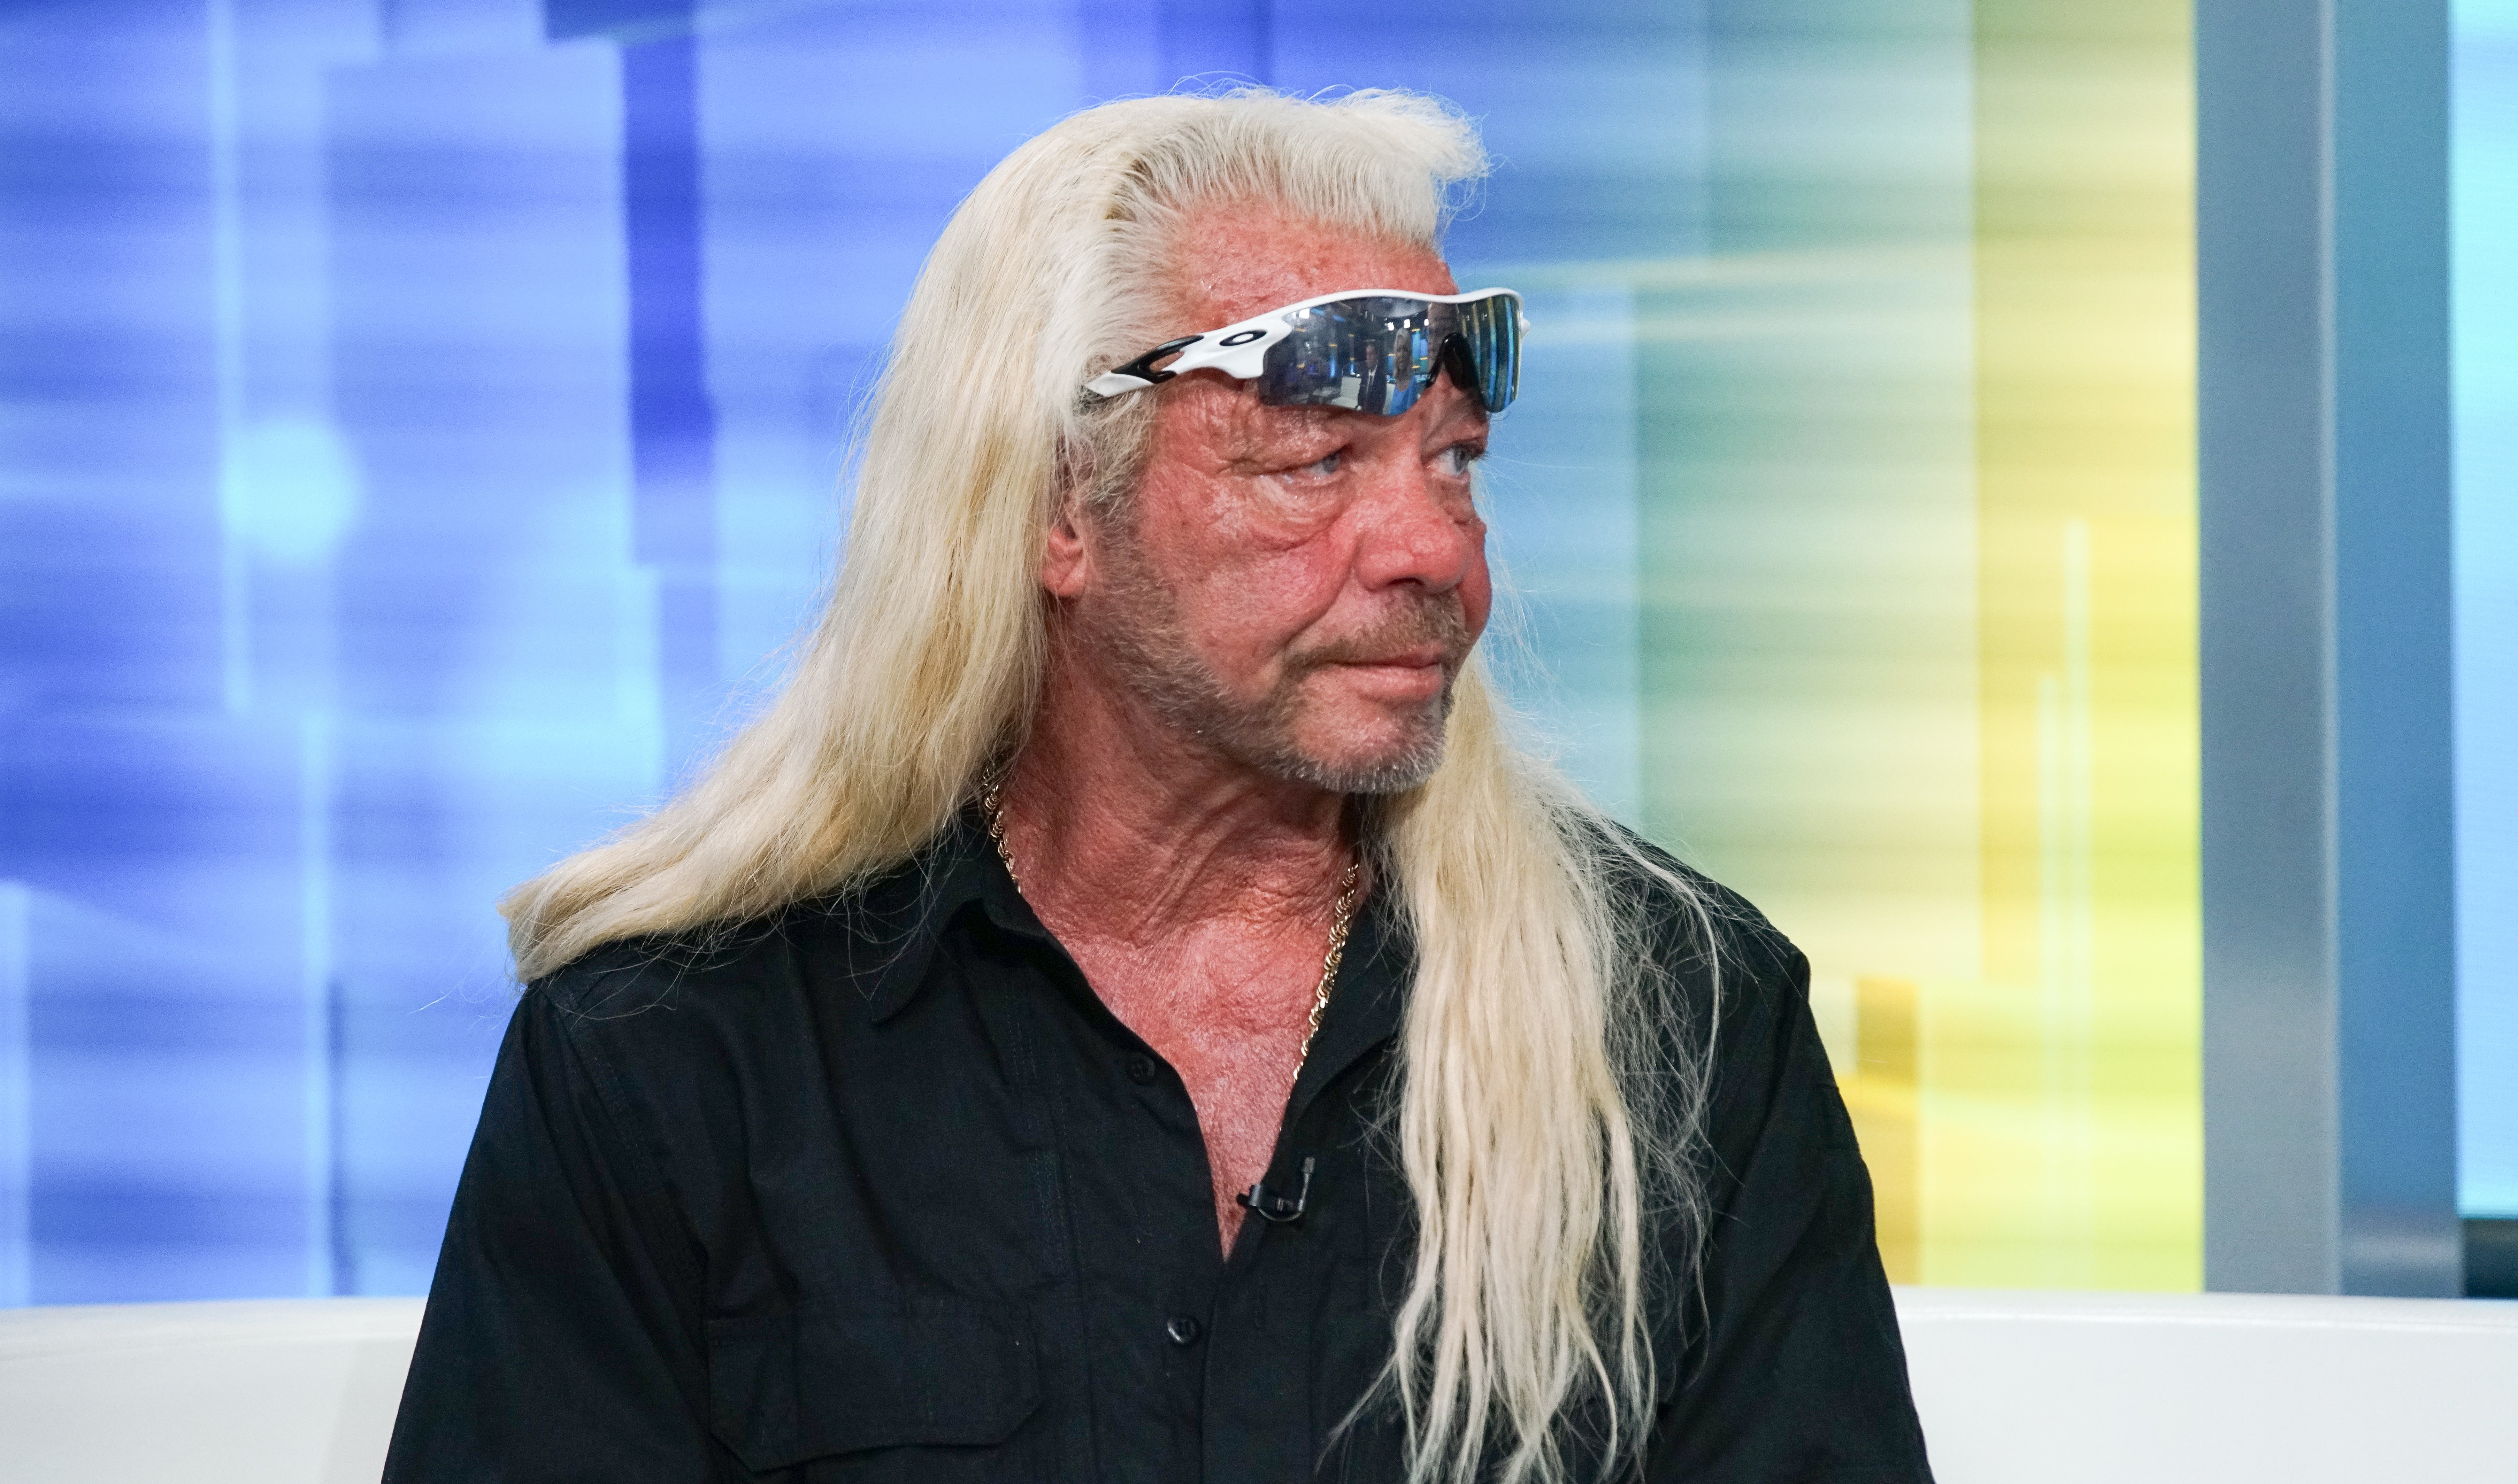 Dog the Bounty Hunter has weighed in on missing persons cases in the past